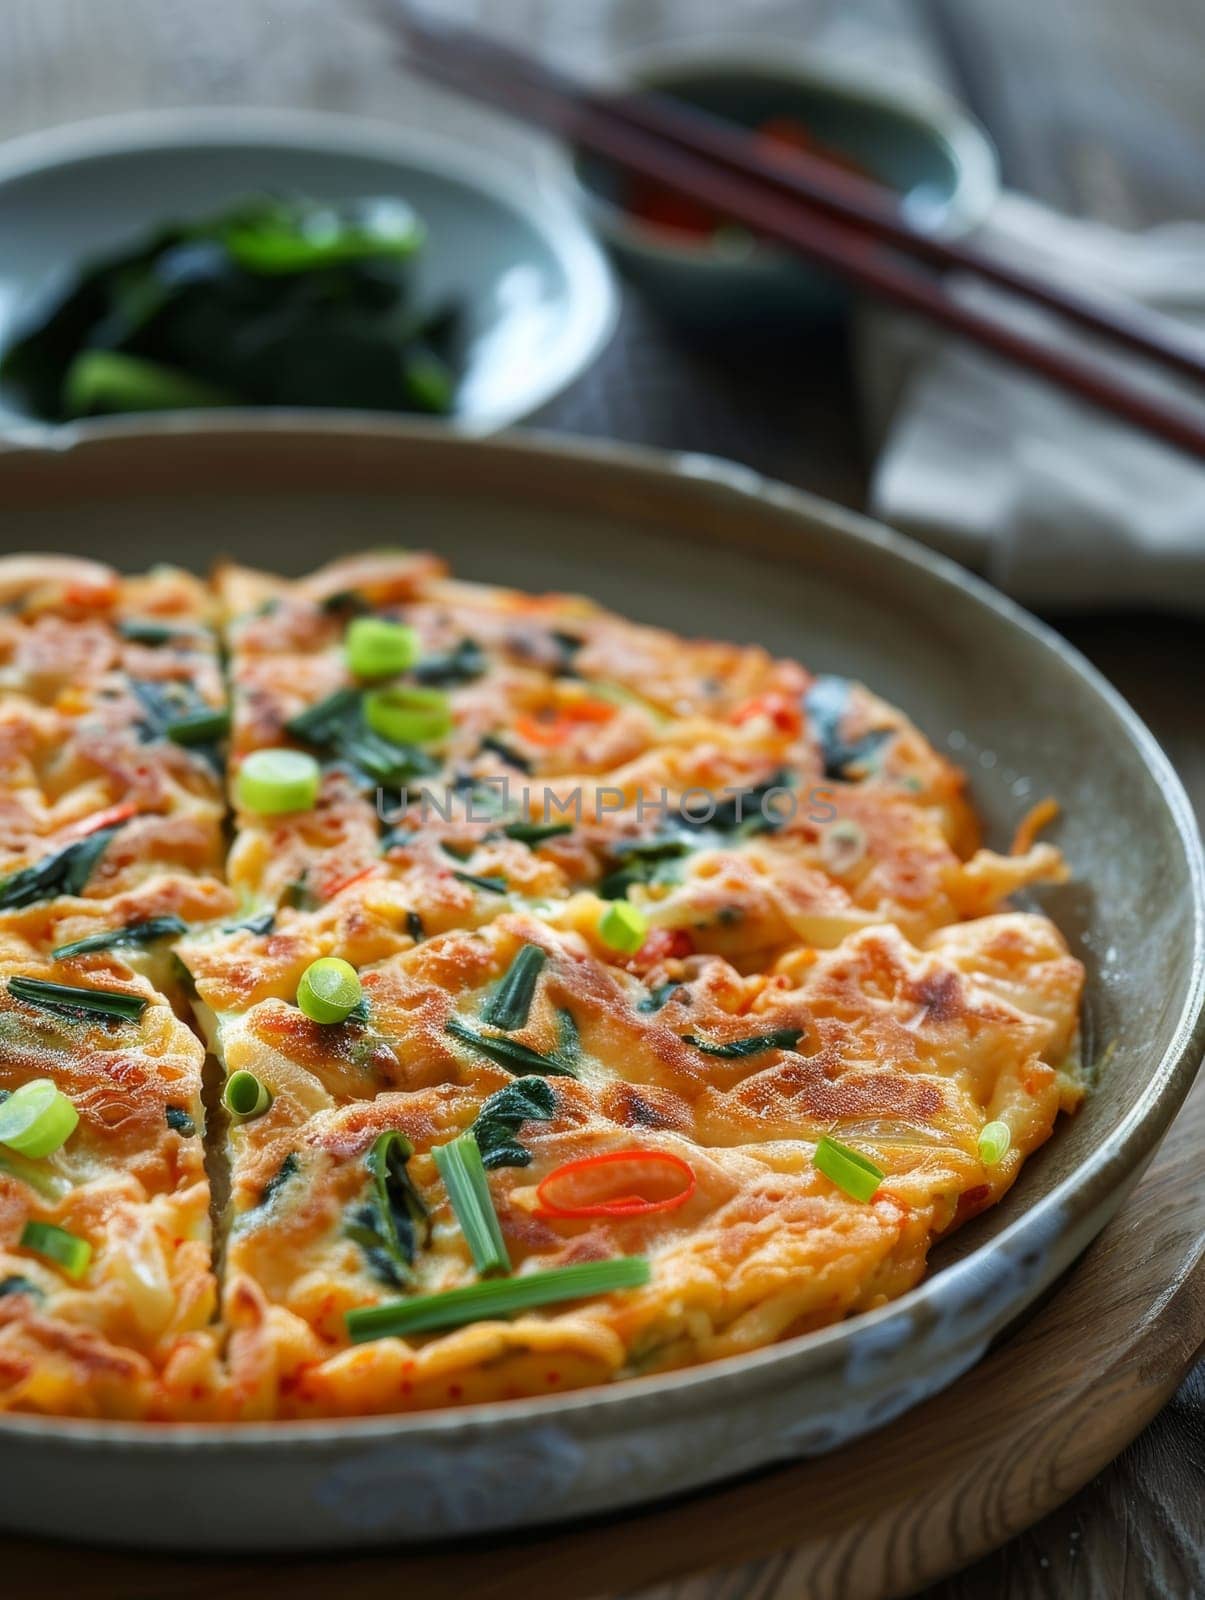 Delectable South Korean haemul pajeon, a savory seafood pancake with fresh scallions, served on a ceramic dish. This traditional Asian cuisine item makes a mouthwatering appetizer or snack